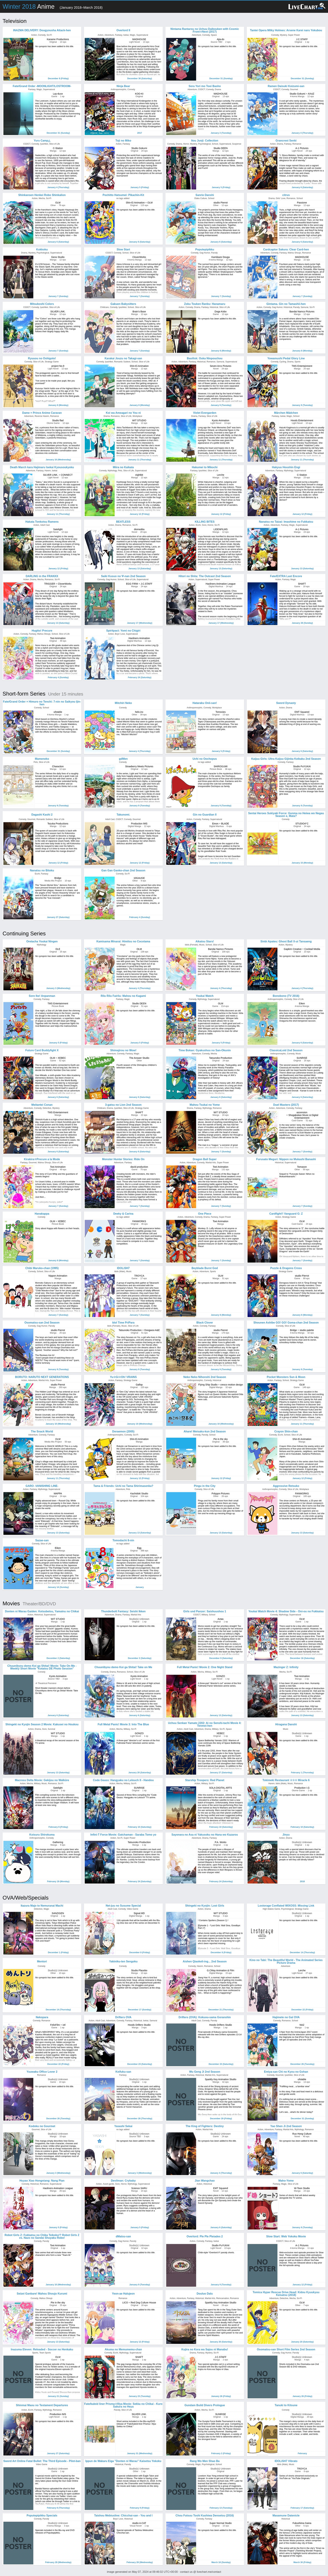 Winter 2018 Anime Chart - Television | LiveChart.me